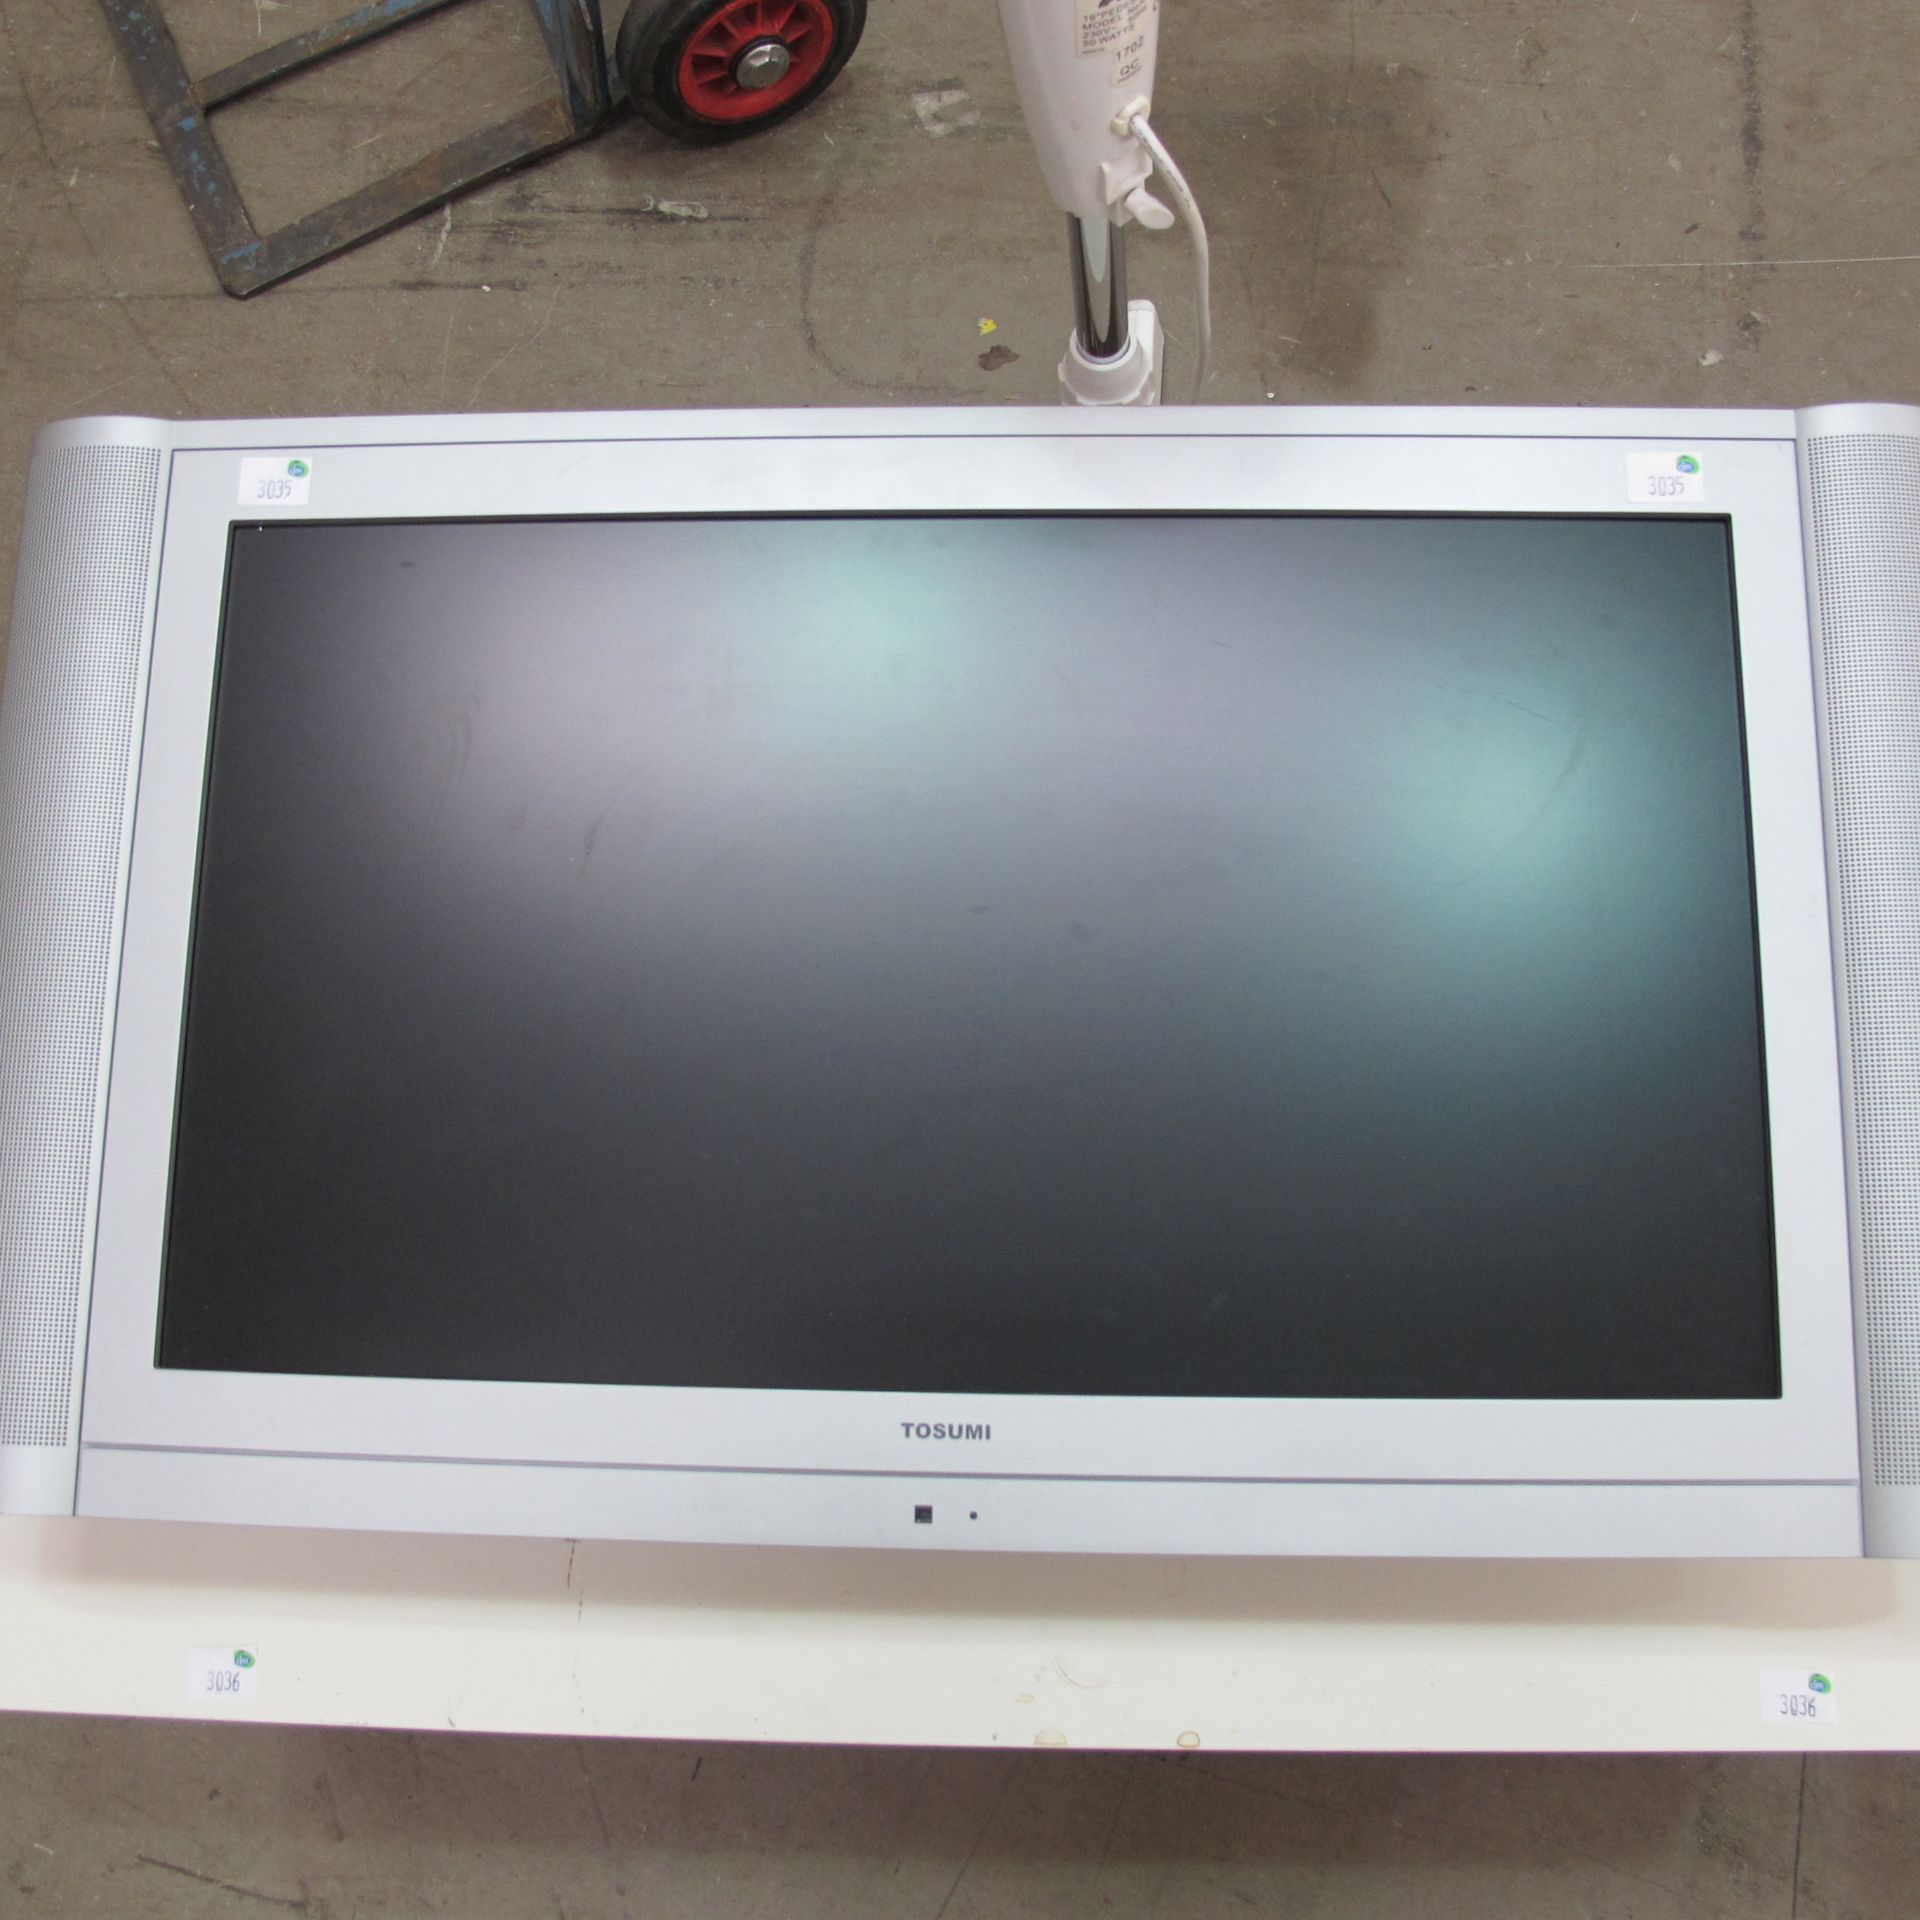 * A Tosumi 26½'' screen TV. Comes with fitted wall mounts and features one HDM1 socket (model number